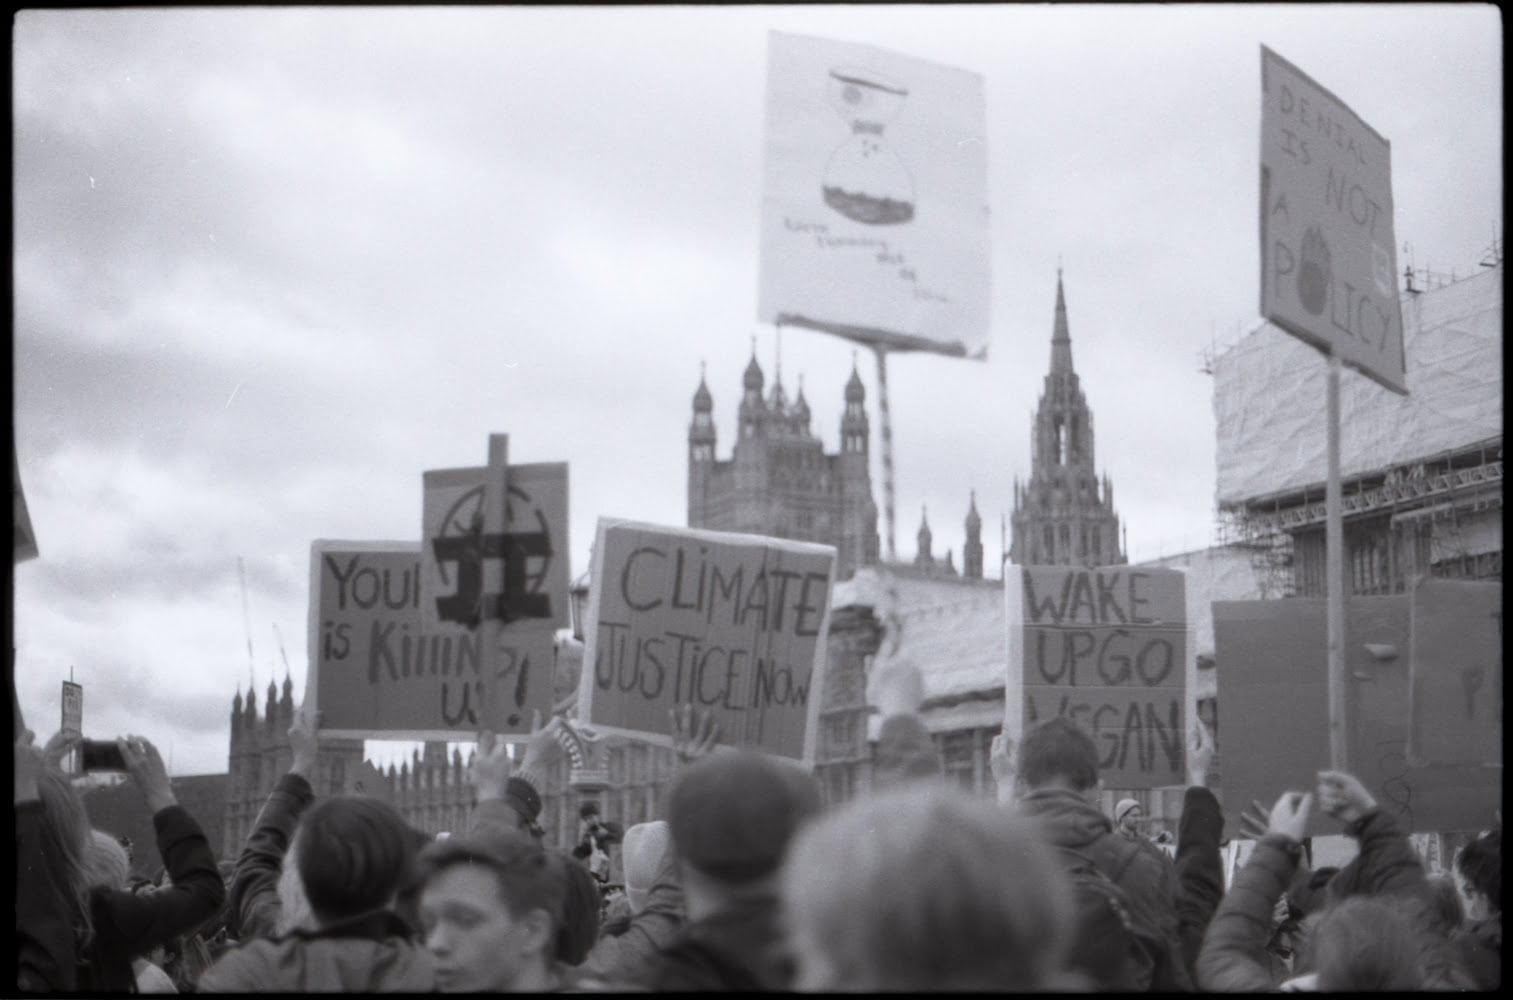 a crowd holding up banners in front of the parliament skyline